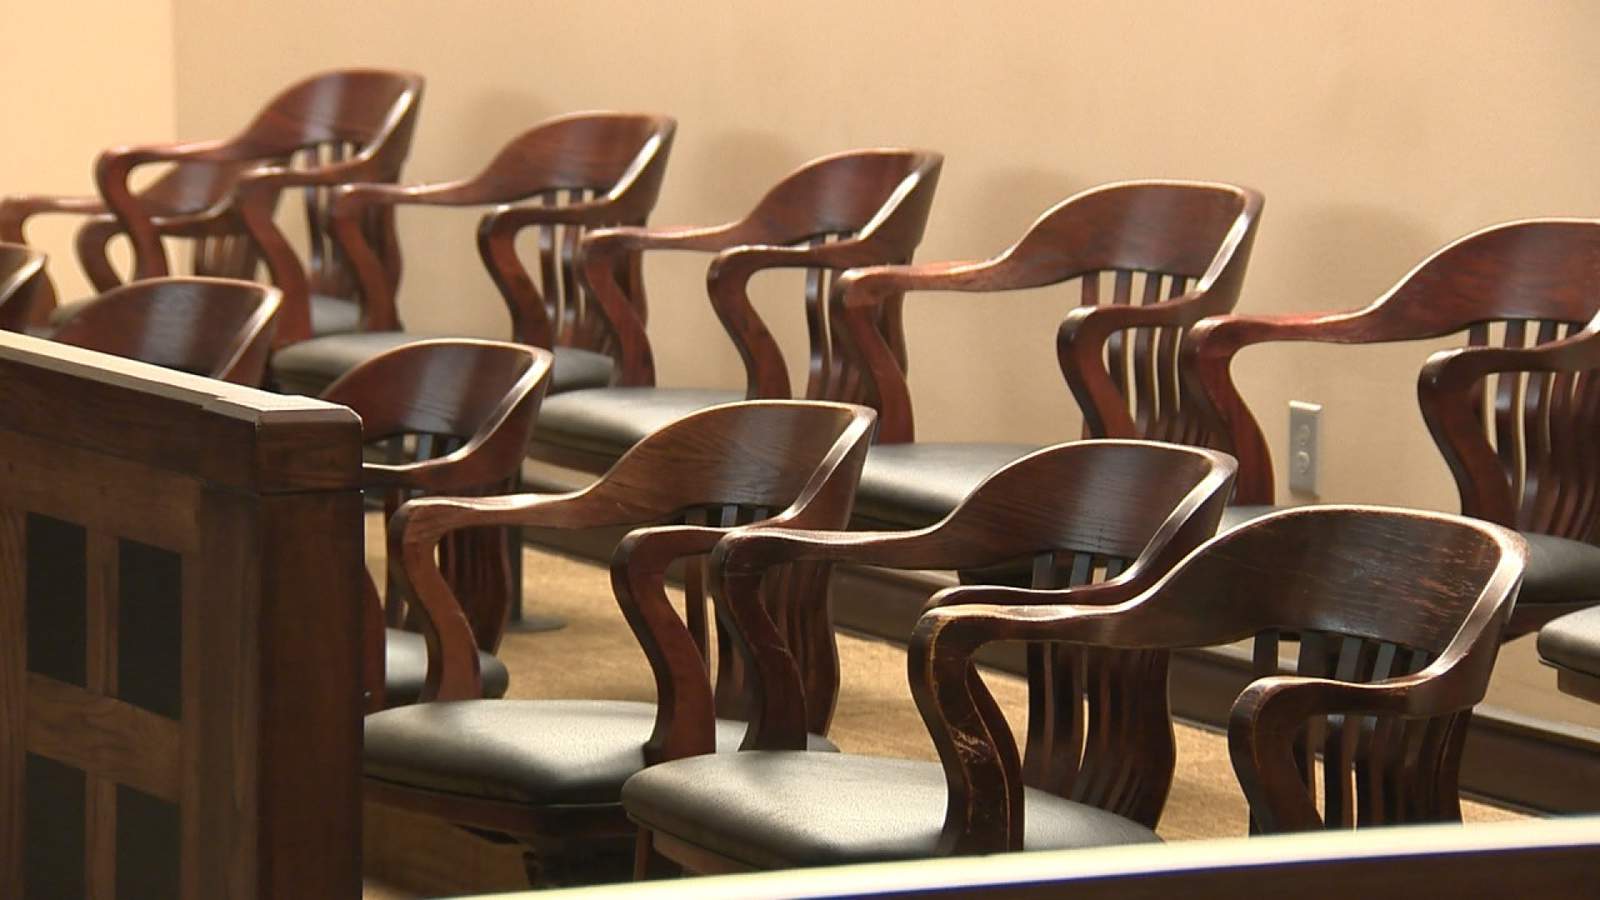 In-person jury trials in Bexar County delayed until at least April 1